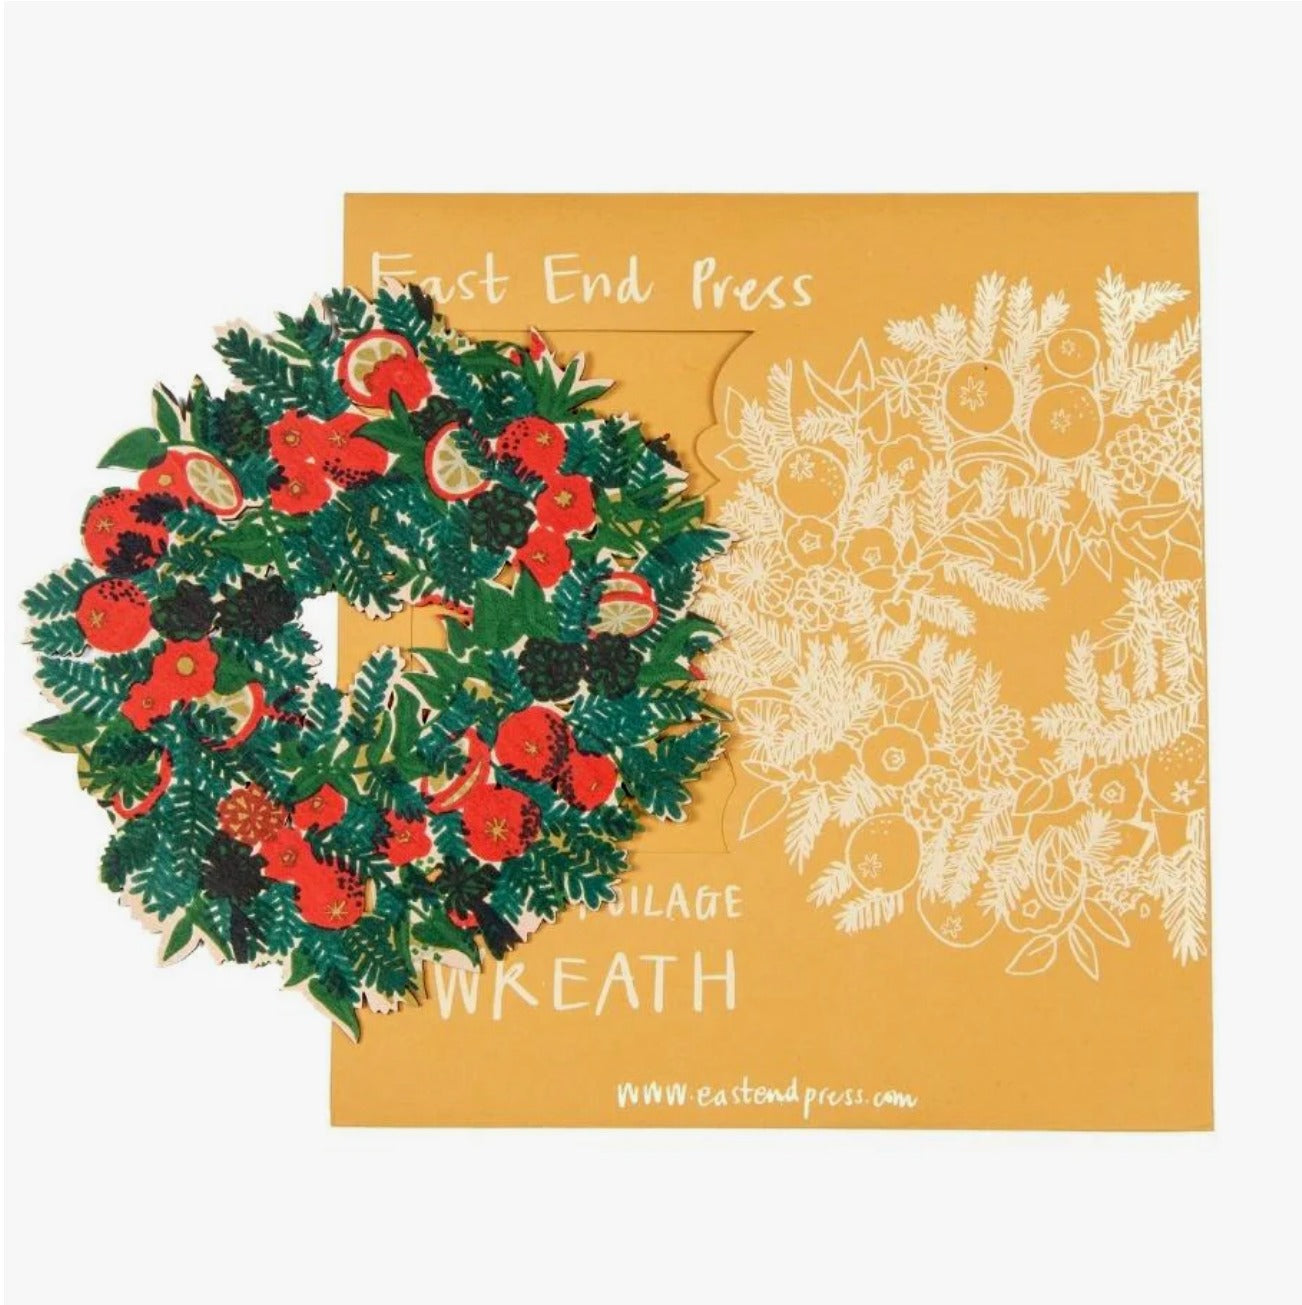 Christmas Foliage Wreath screen printed wooden decoration - The Bristol Artisan Handmade Sustainable Gifts and Homewares.